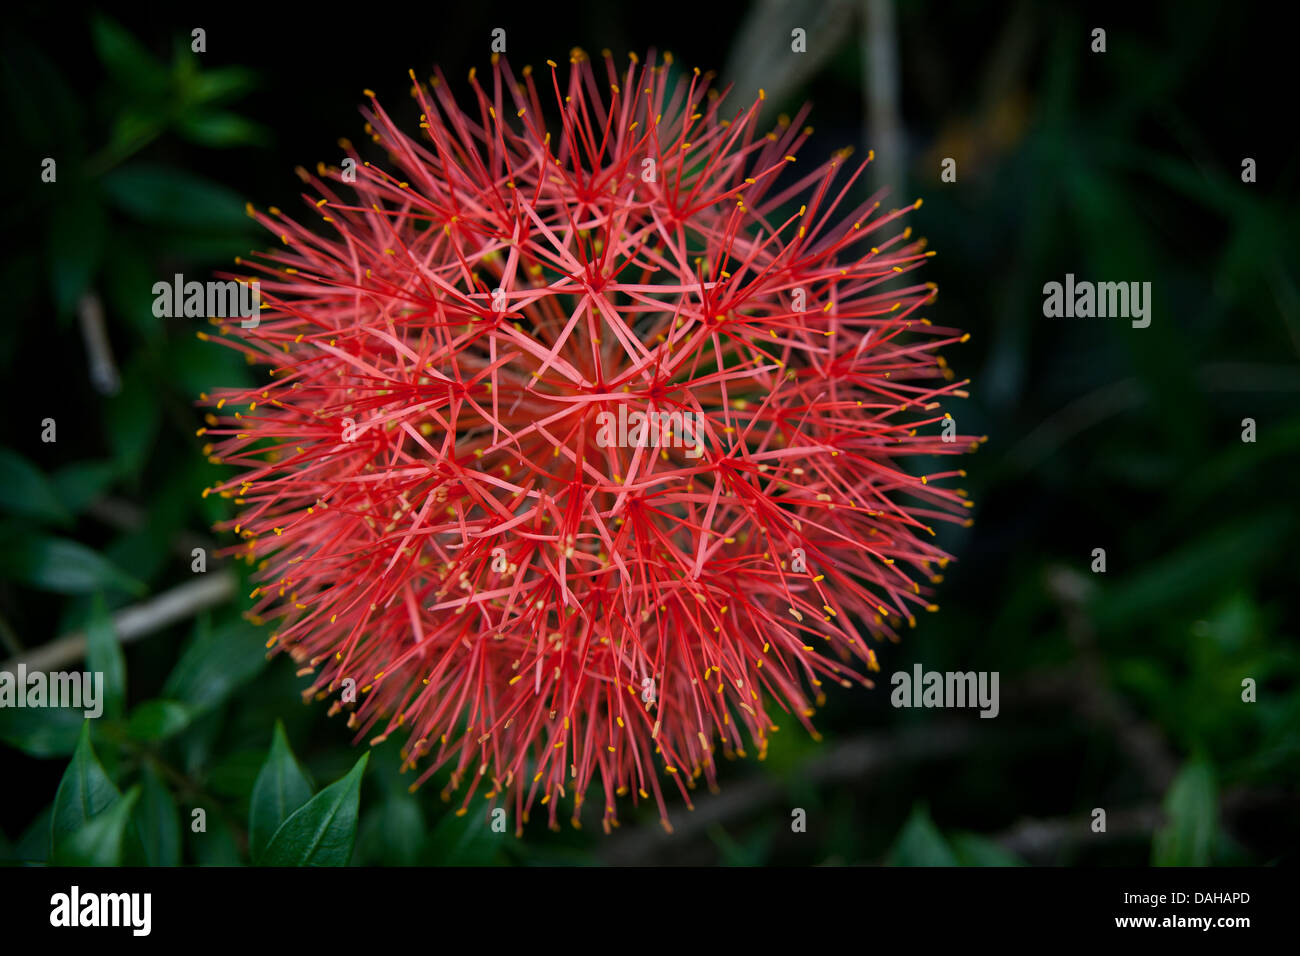 Blood lily flower, Scadoxus multiflorus, in a garden in Penonome, Cocle province, Republic of Panama. Stock Photo